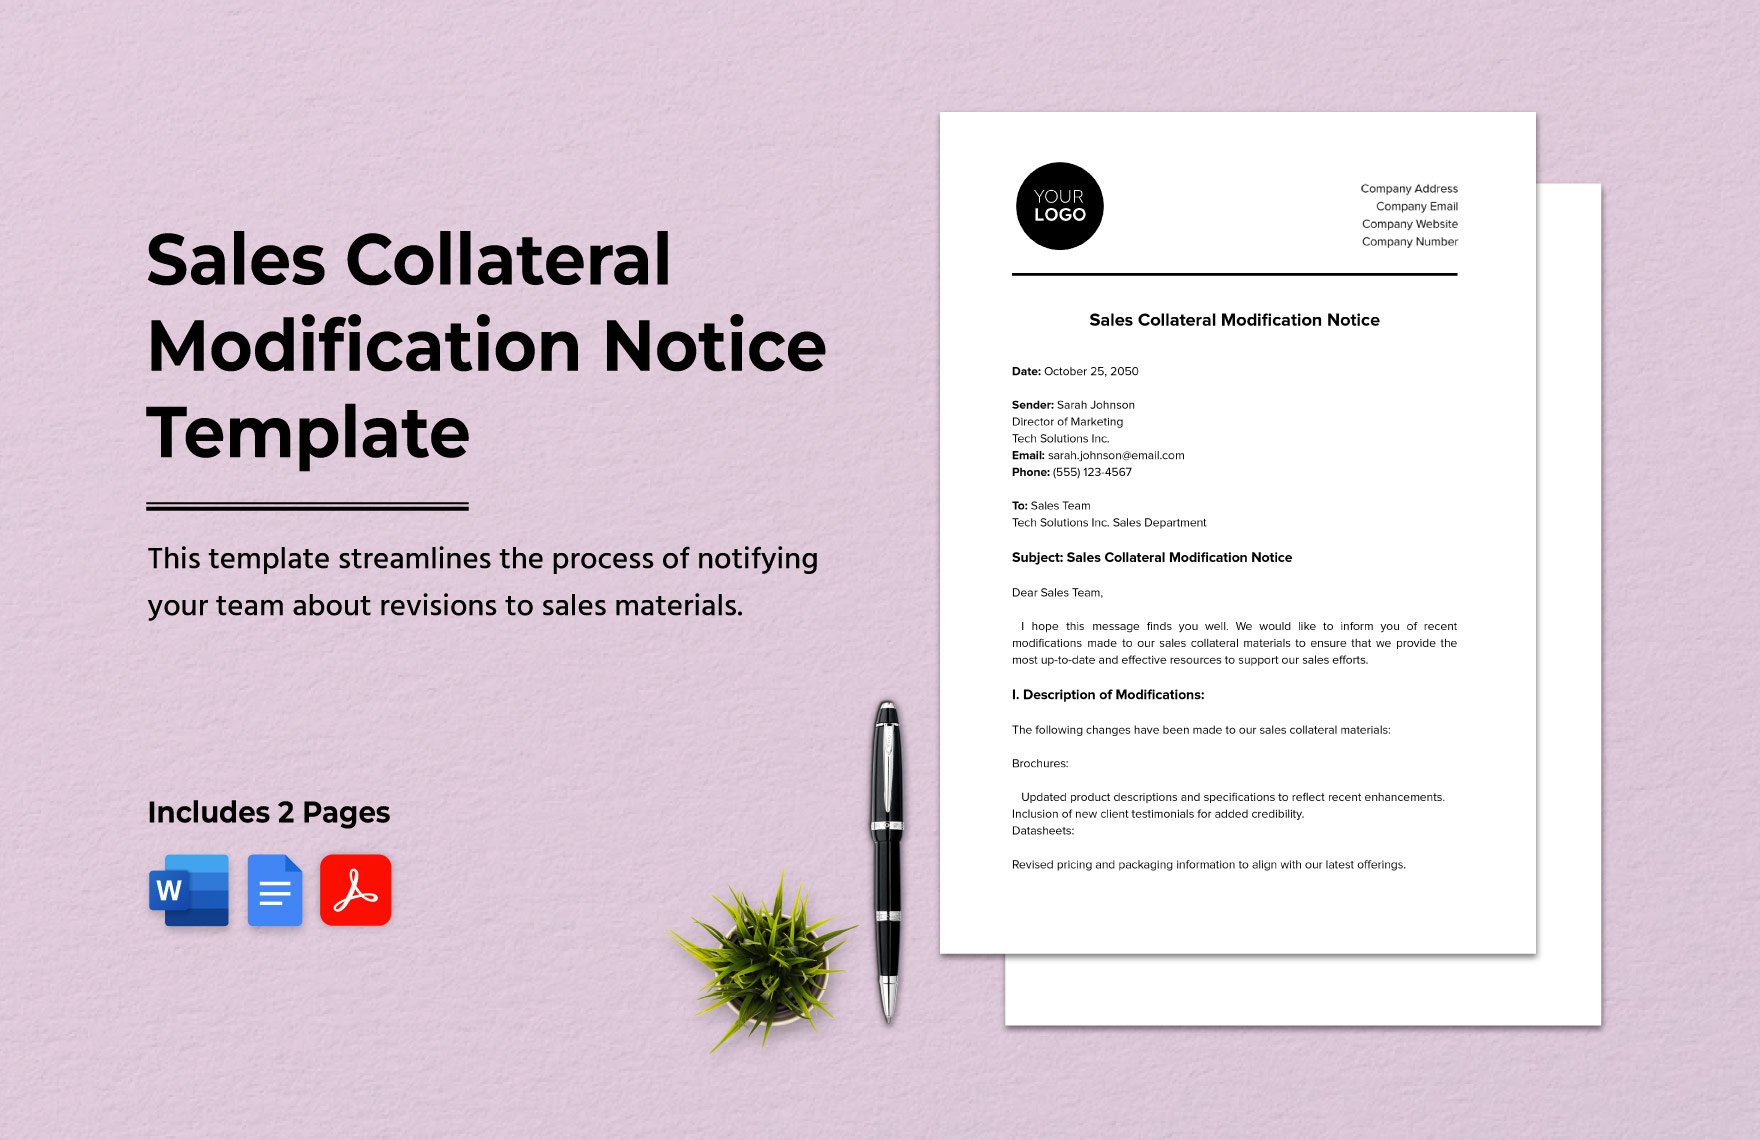 Sales Collateral Modification Notice Template in Word, Google Docs, PDF